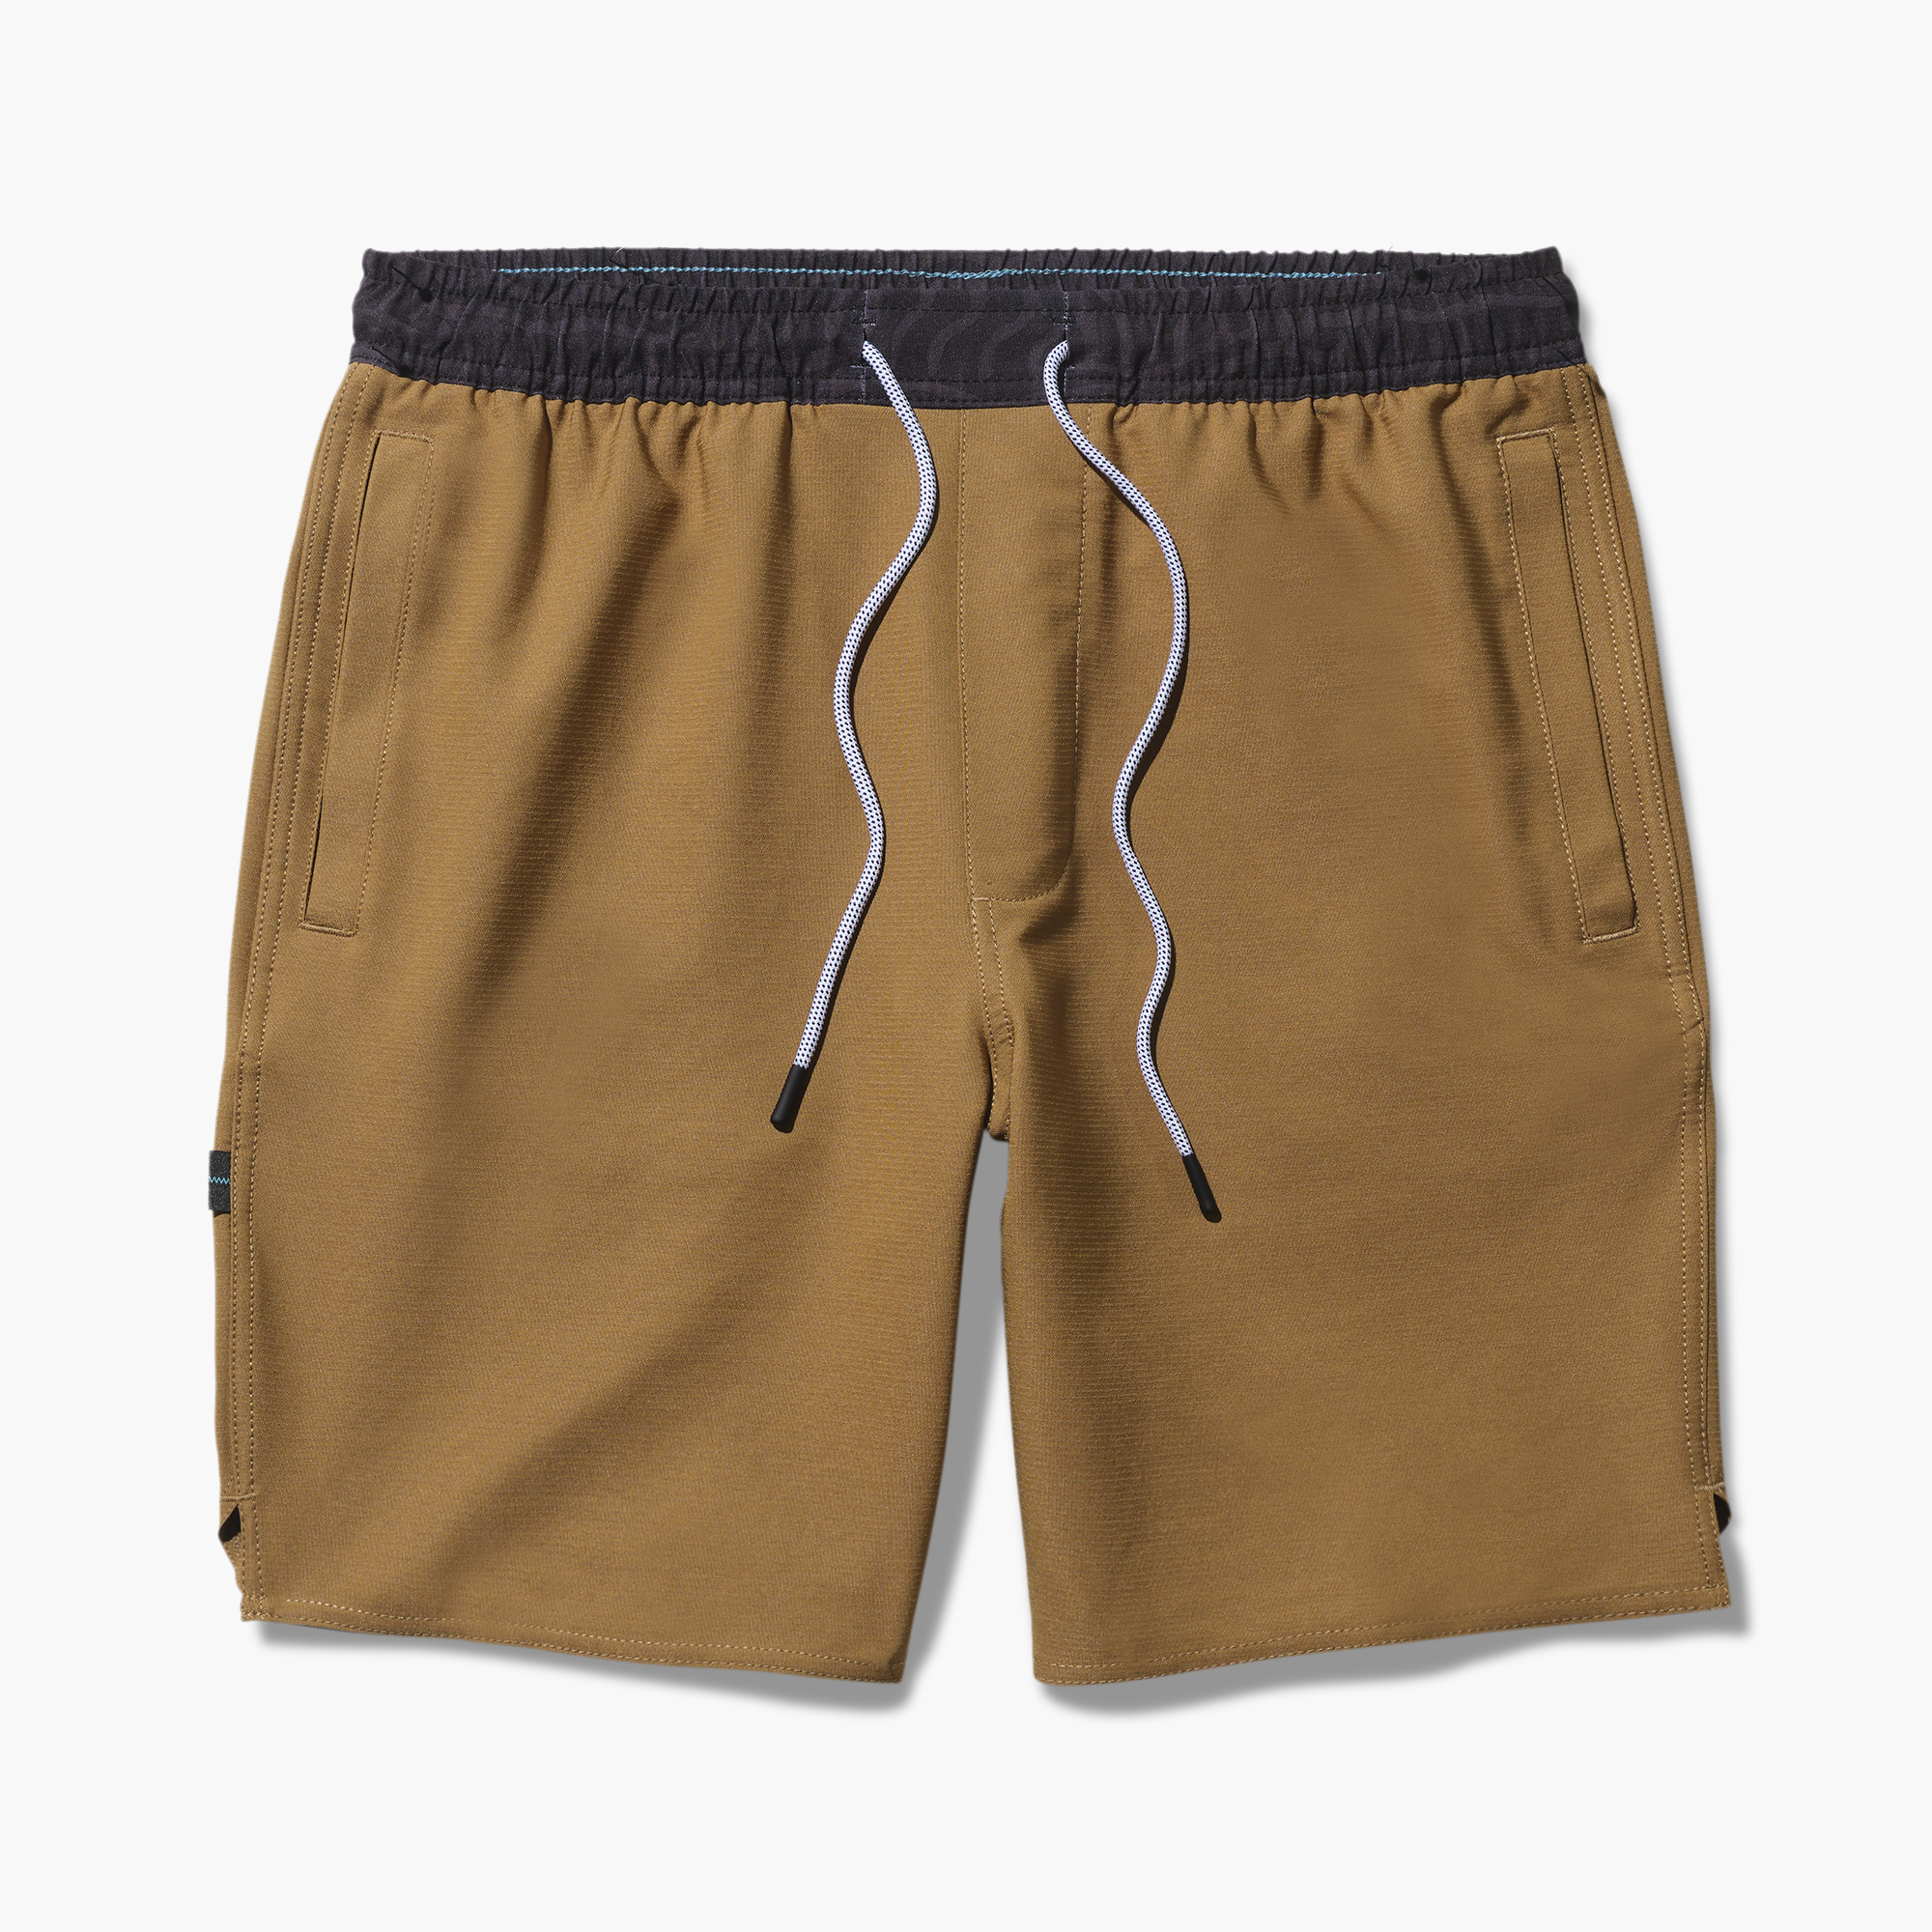 Complex Athletic Short | Stance